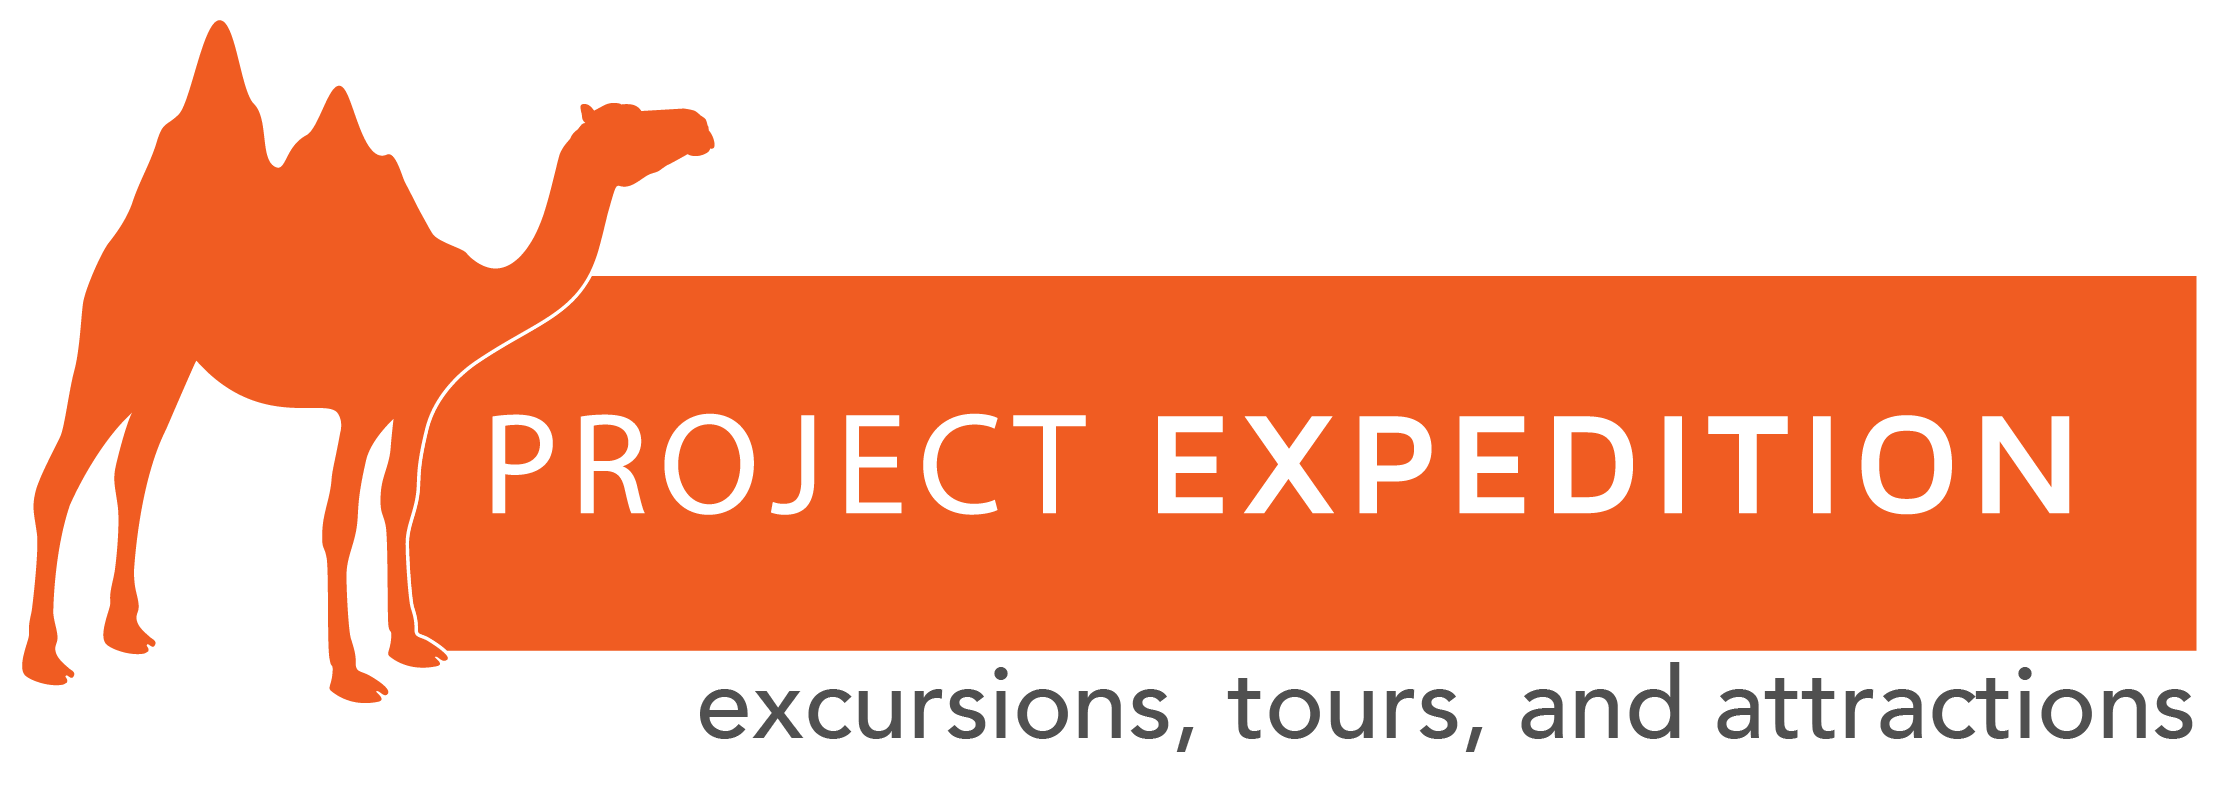 PROJECT EXPEDITION LOGO